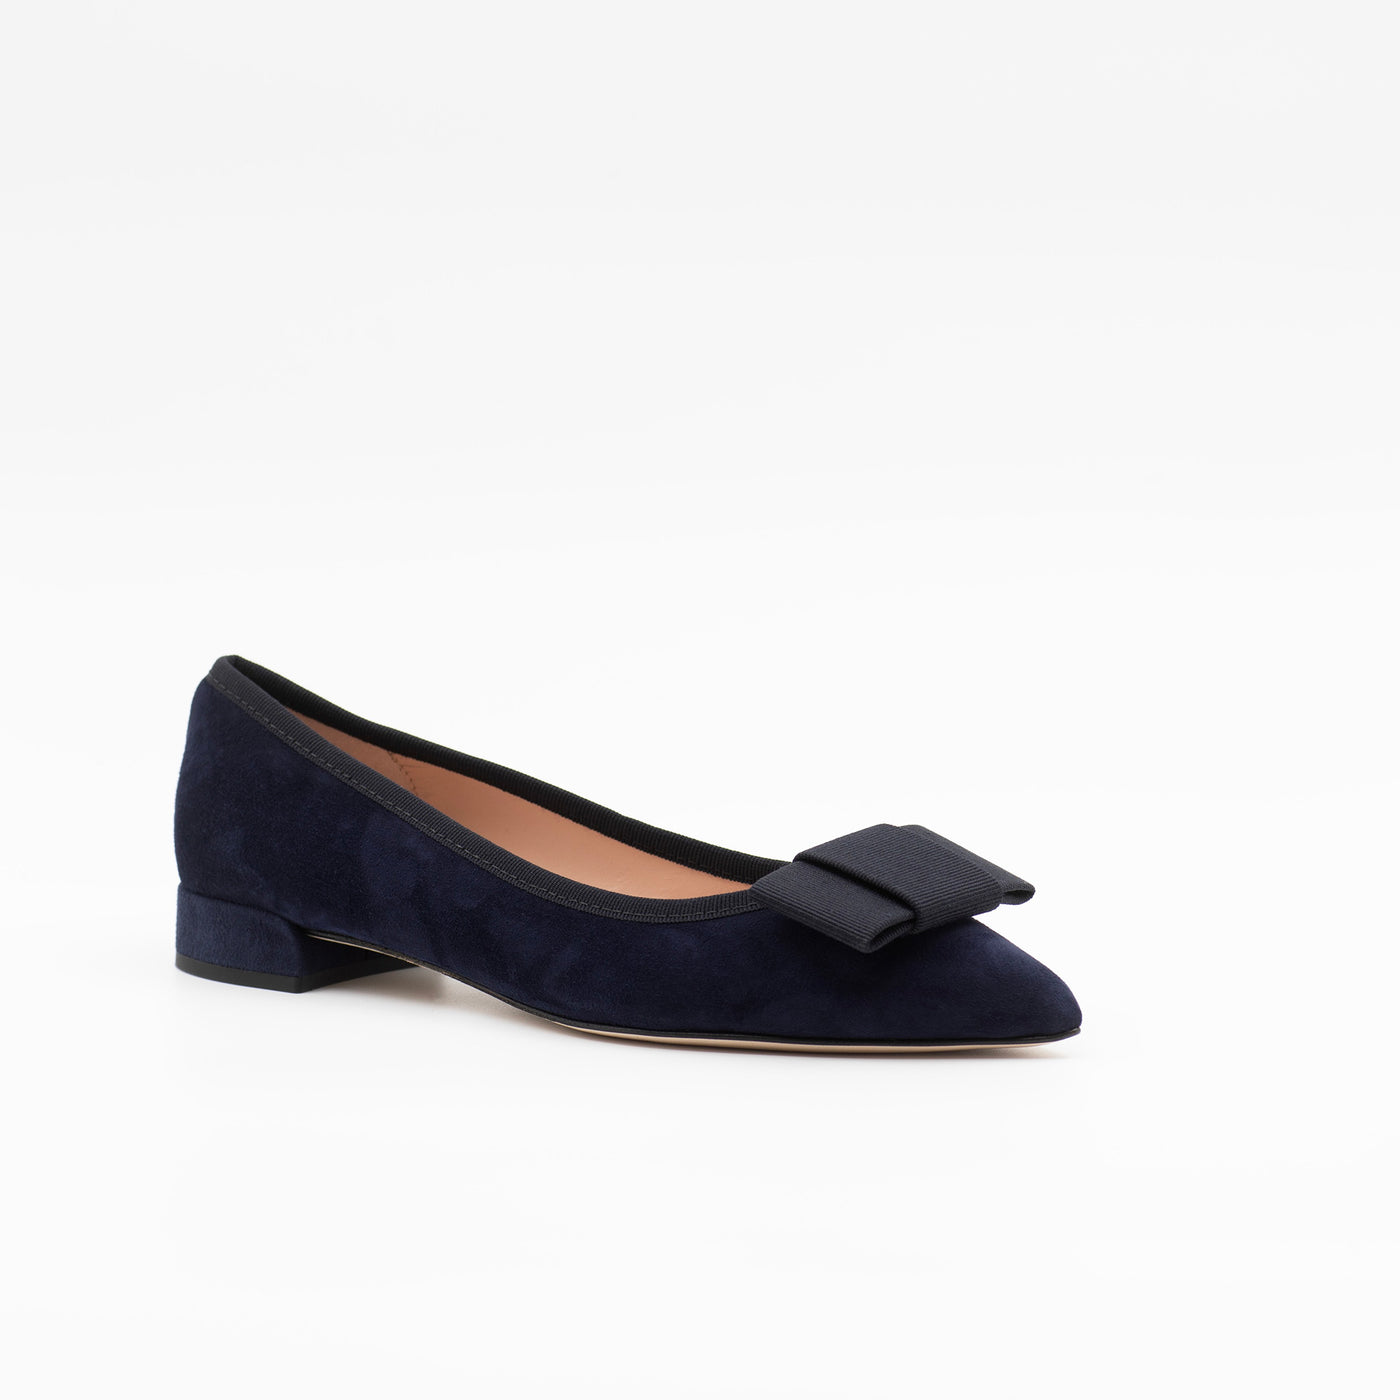 Pointed toe flats in navy with a bow